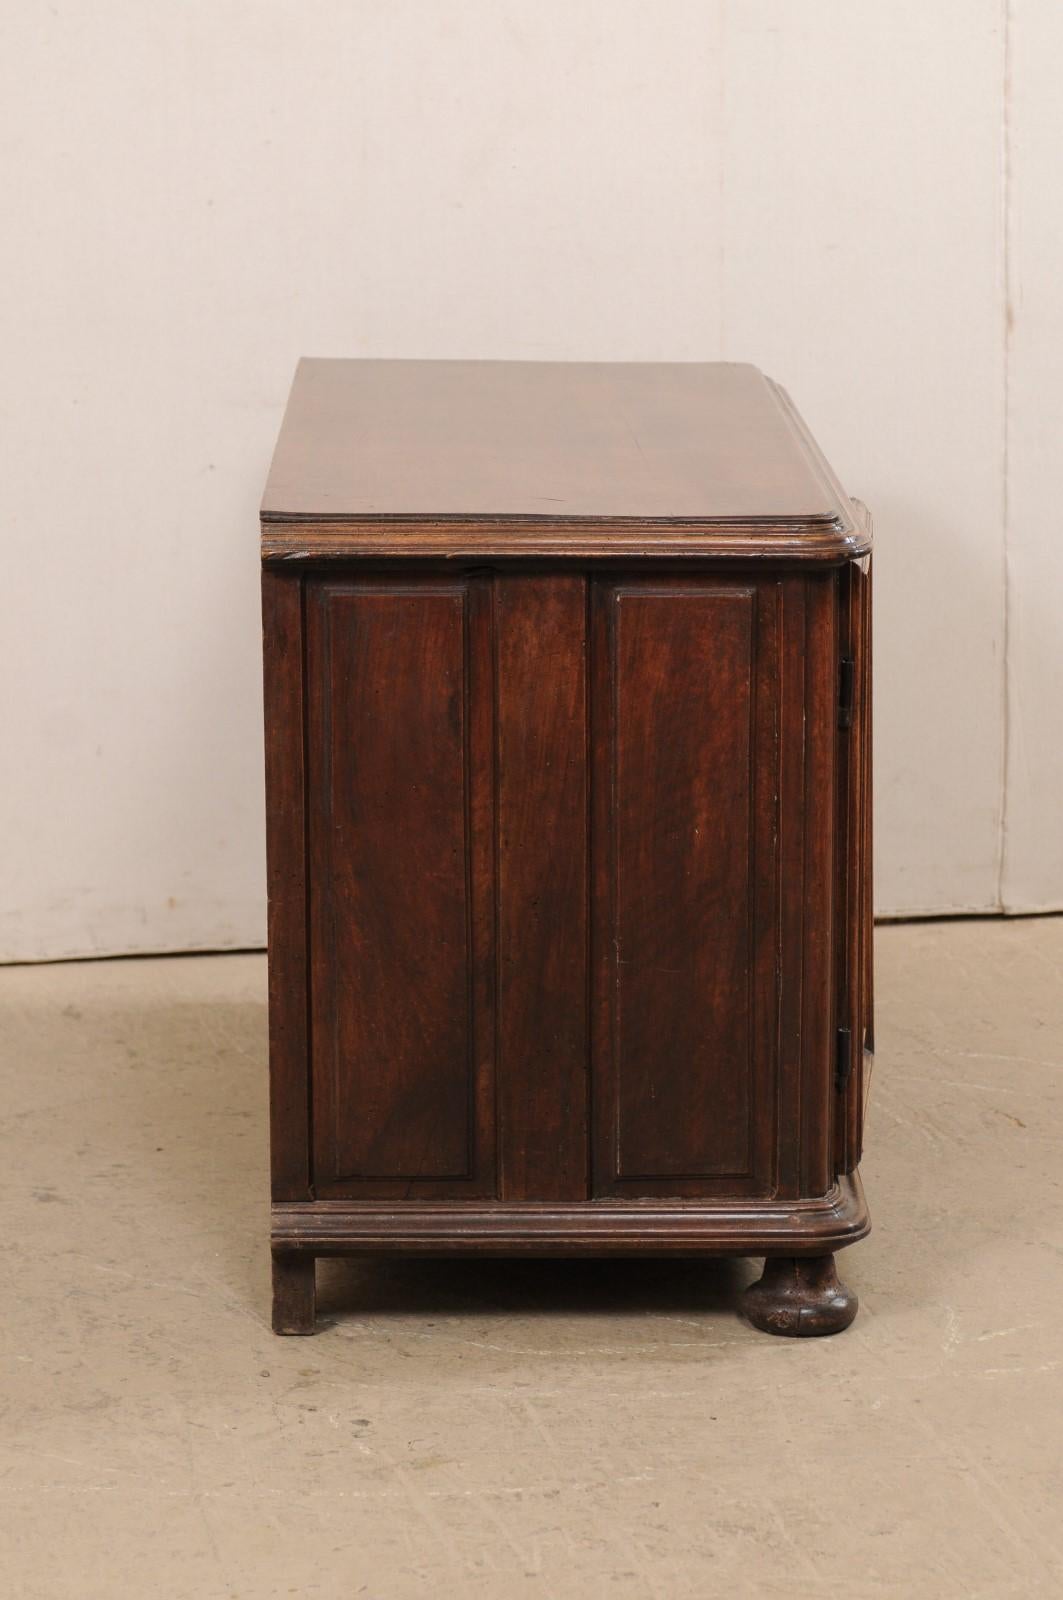 Wood French Buffet Cabinet w/Thick Reed Carving & Diamond Paneled Doors, Early 19th C